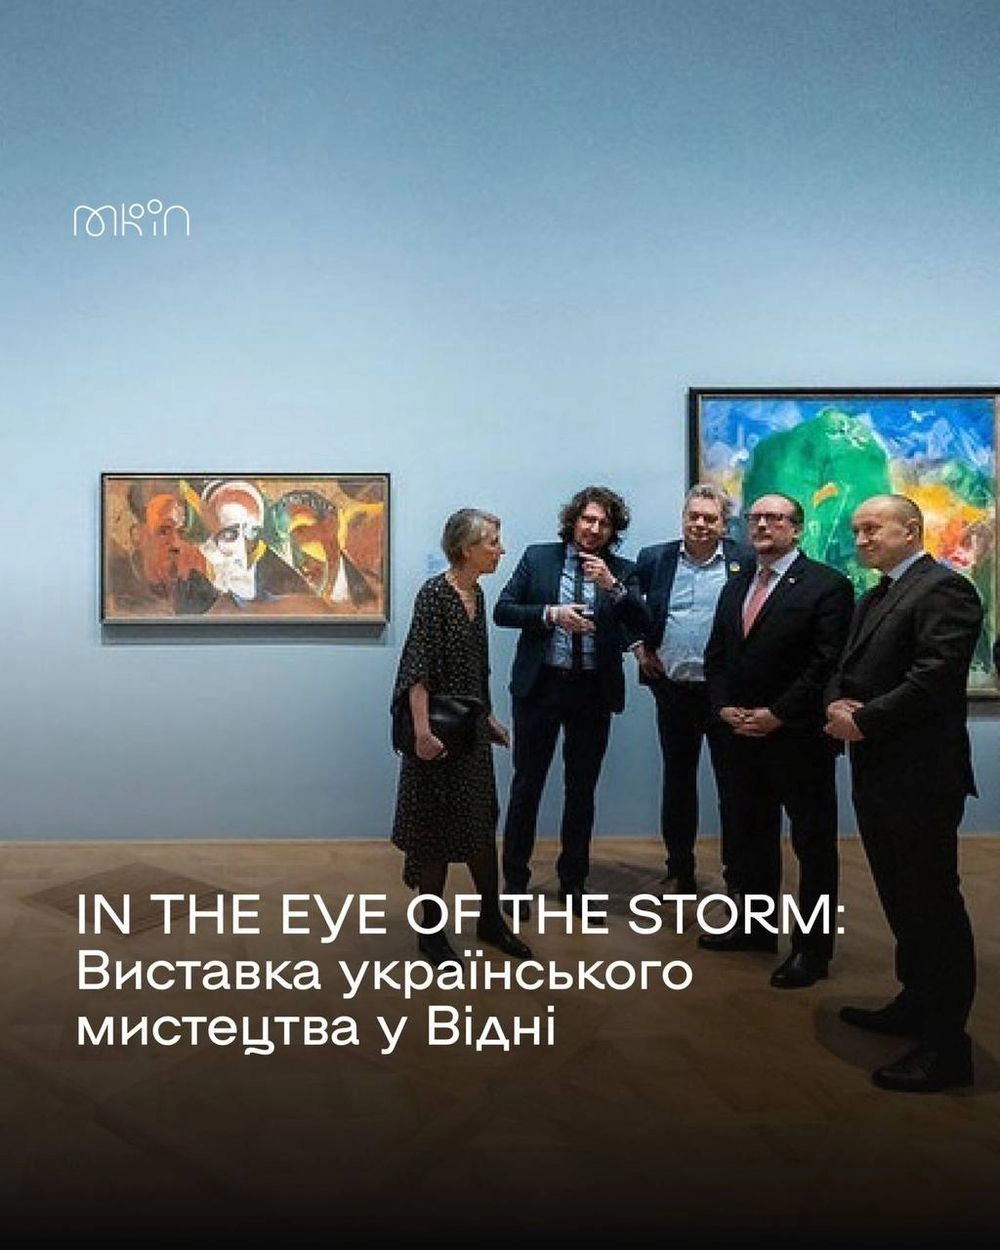 A unique Ukrainian exhibition "In the Eye of the Storm. Modernism in Ukraine"